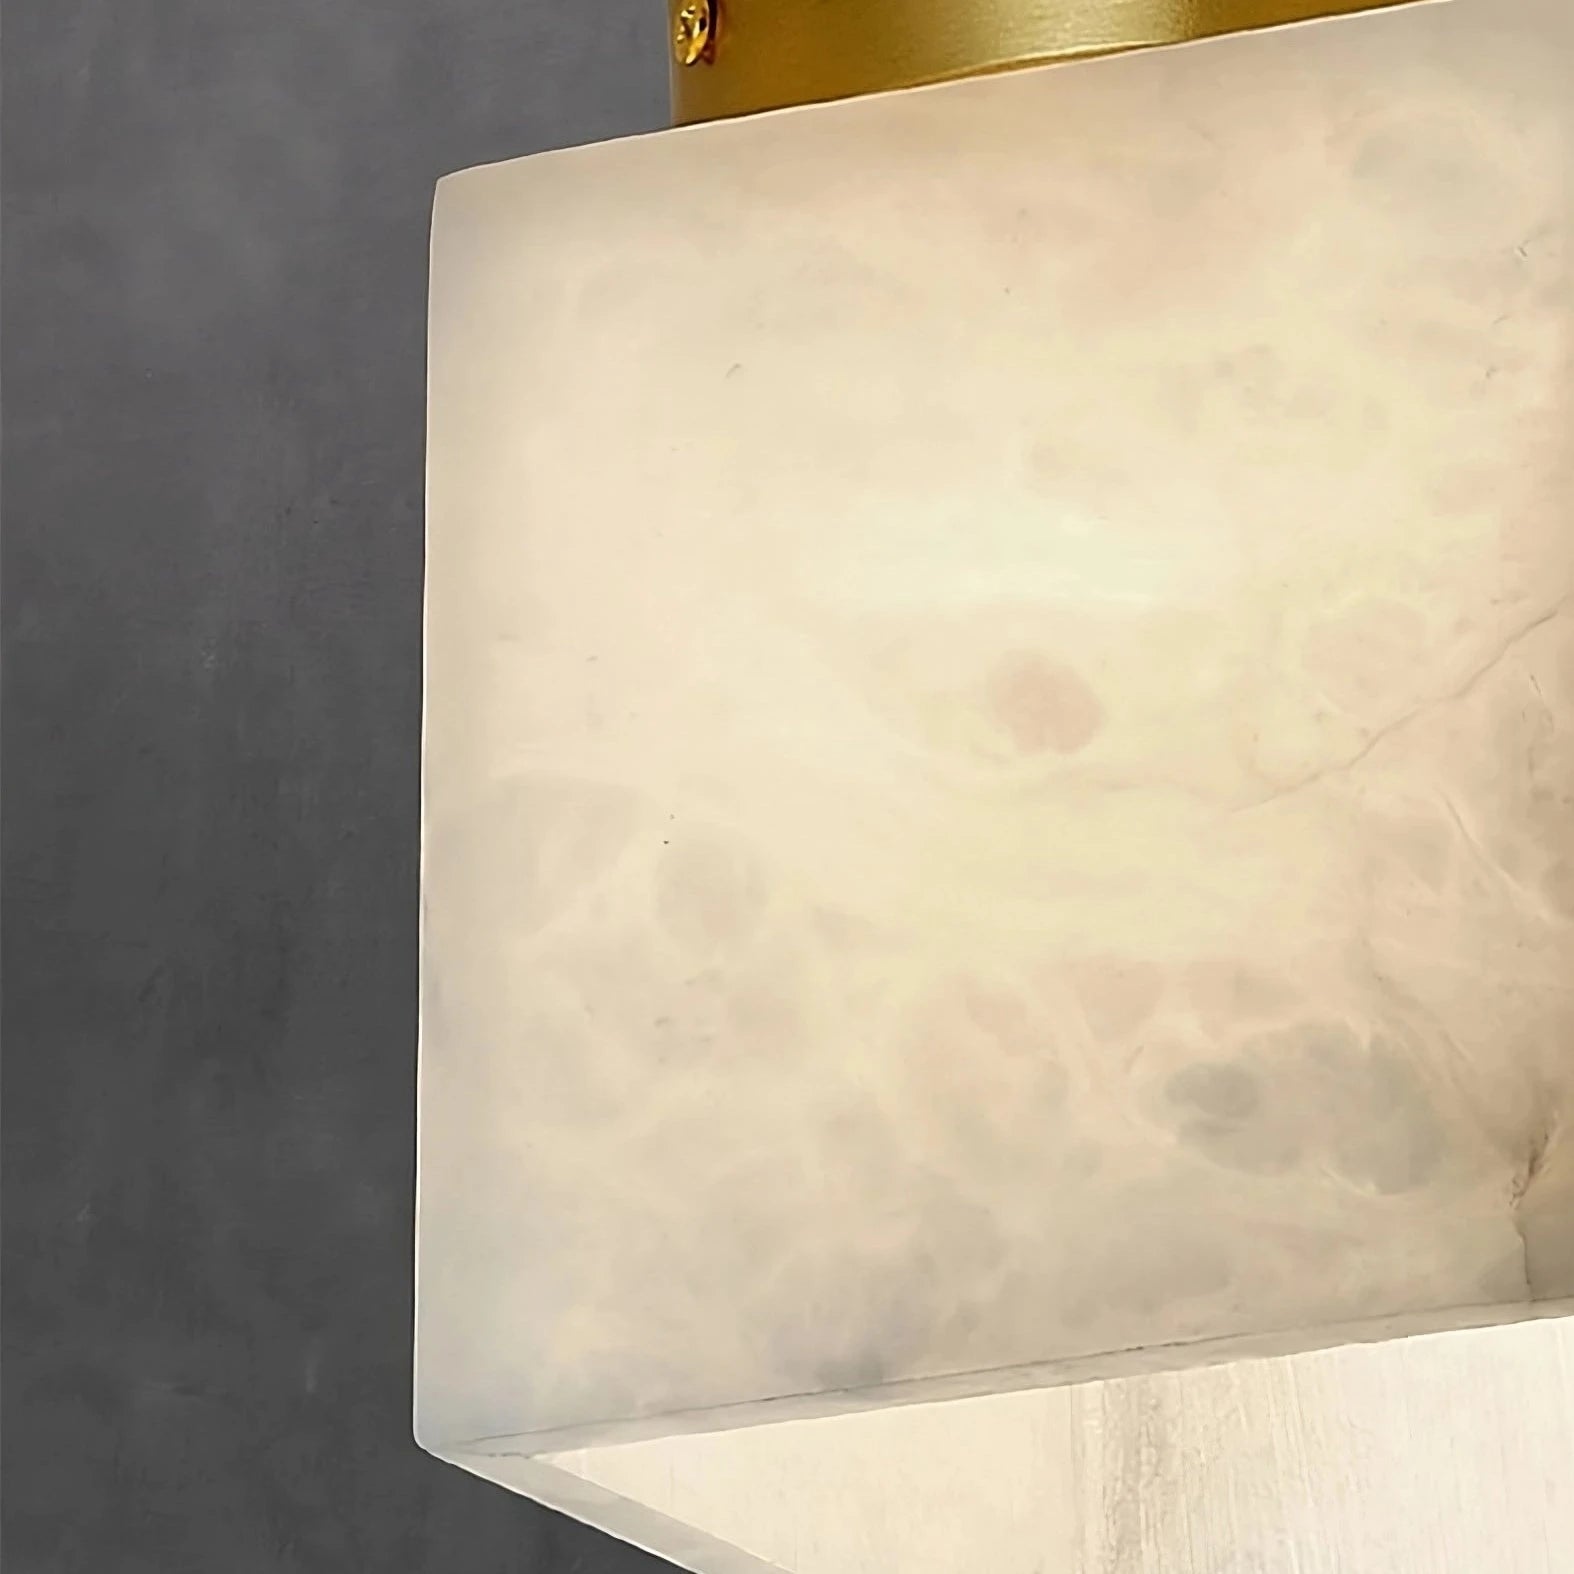 Close-up image of a square, frosted glass Natural Marble Hallway Ceiling Light Fixture by Morsale.com with a brass accent. The background is a smooth, dark grey surface, which contrasts with the light's soft, diffused glow.